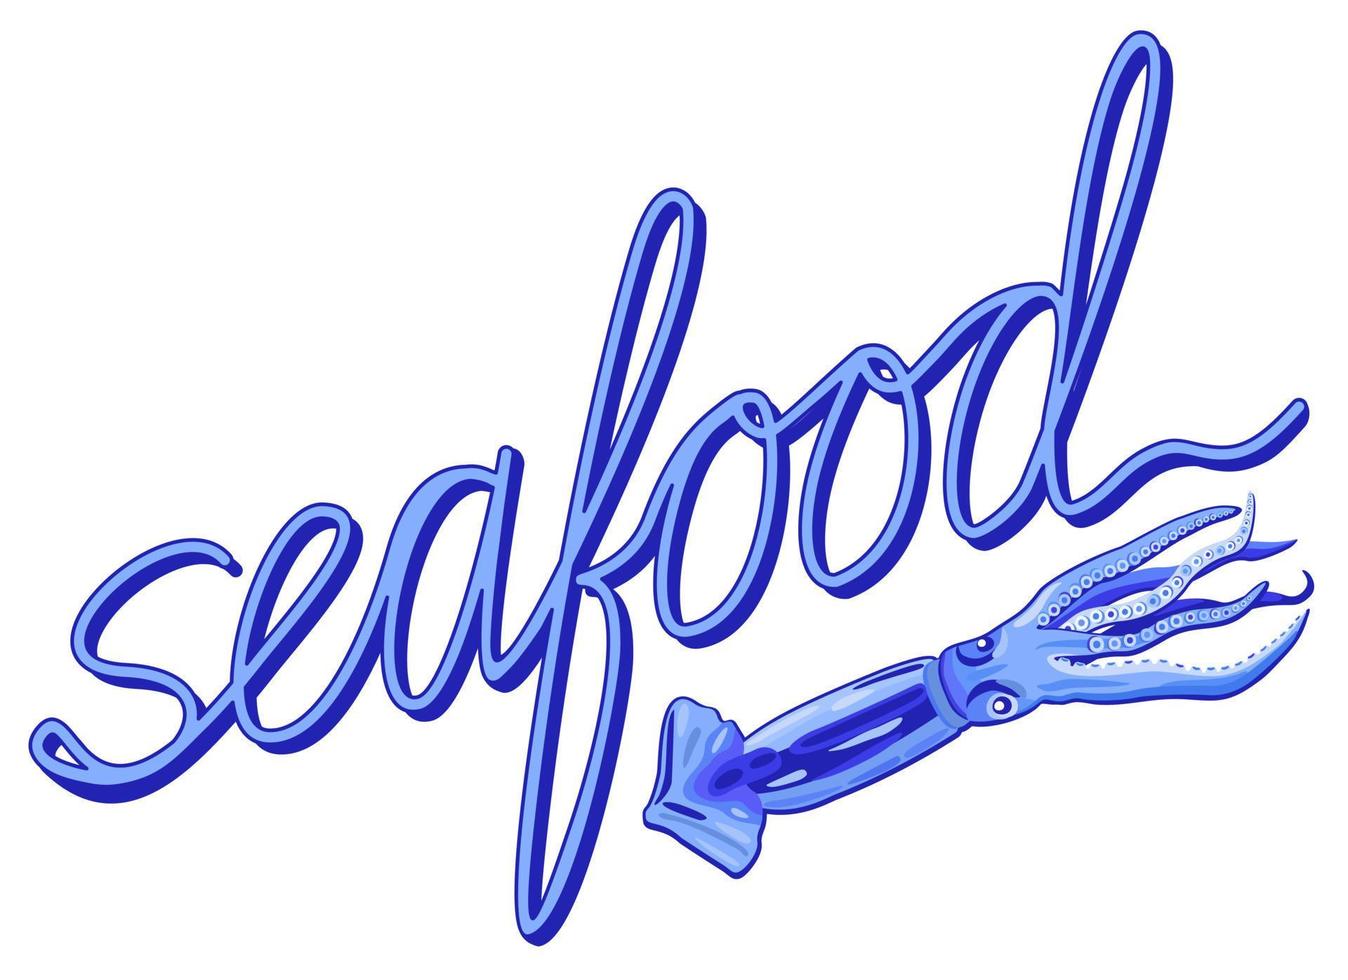 Seafood. Vector lettering with illustration of squid.